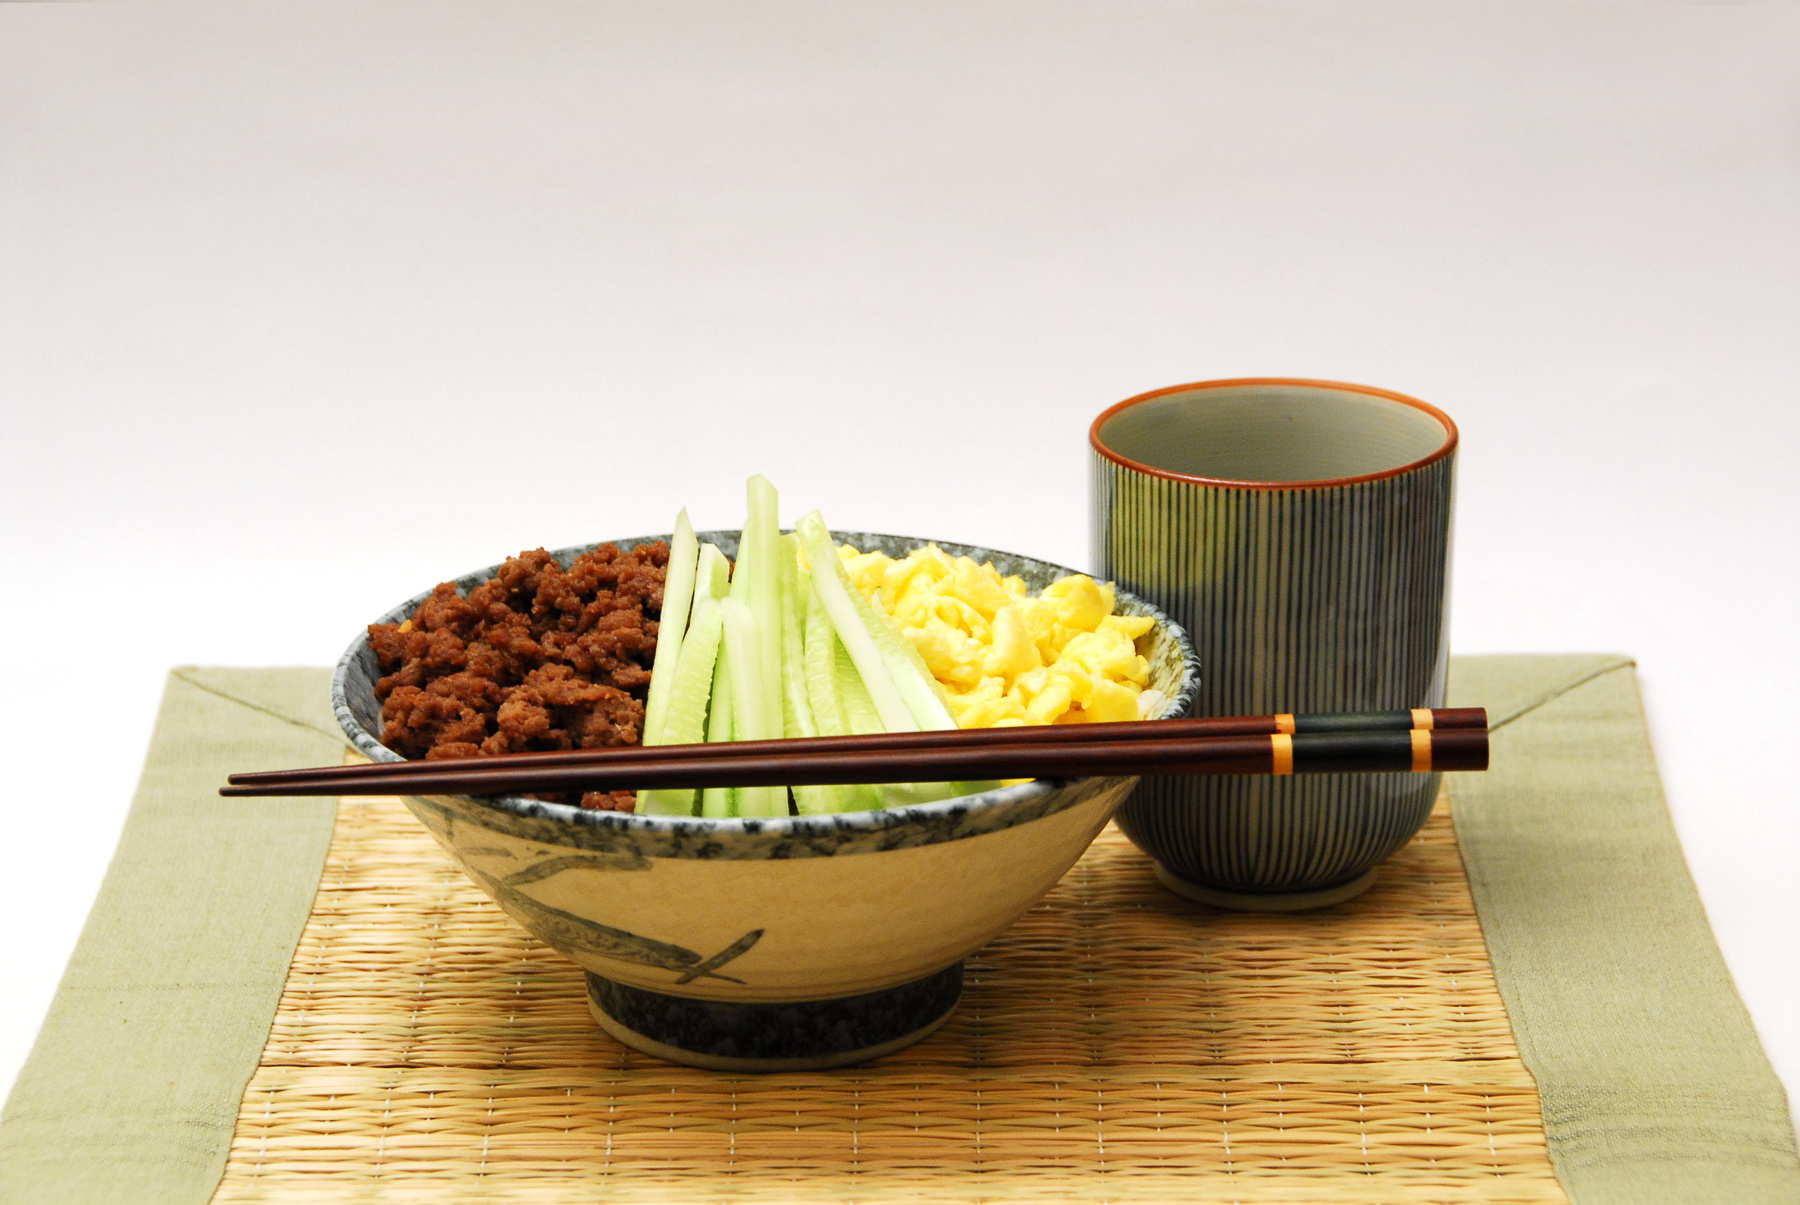 Food book: How to Care for Japanese Kitchen Utensils